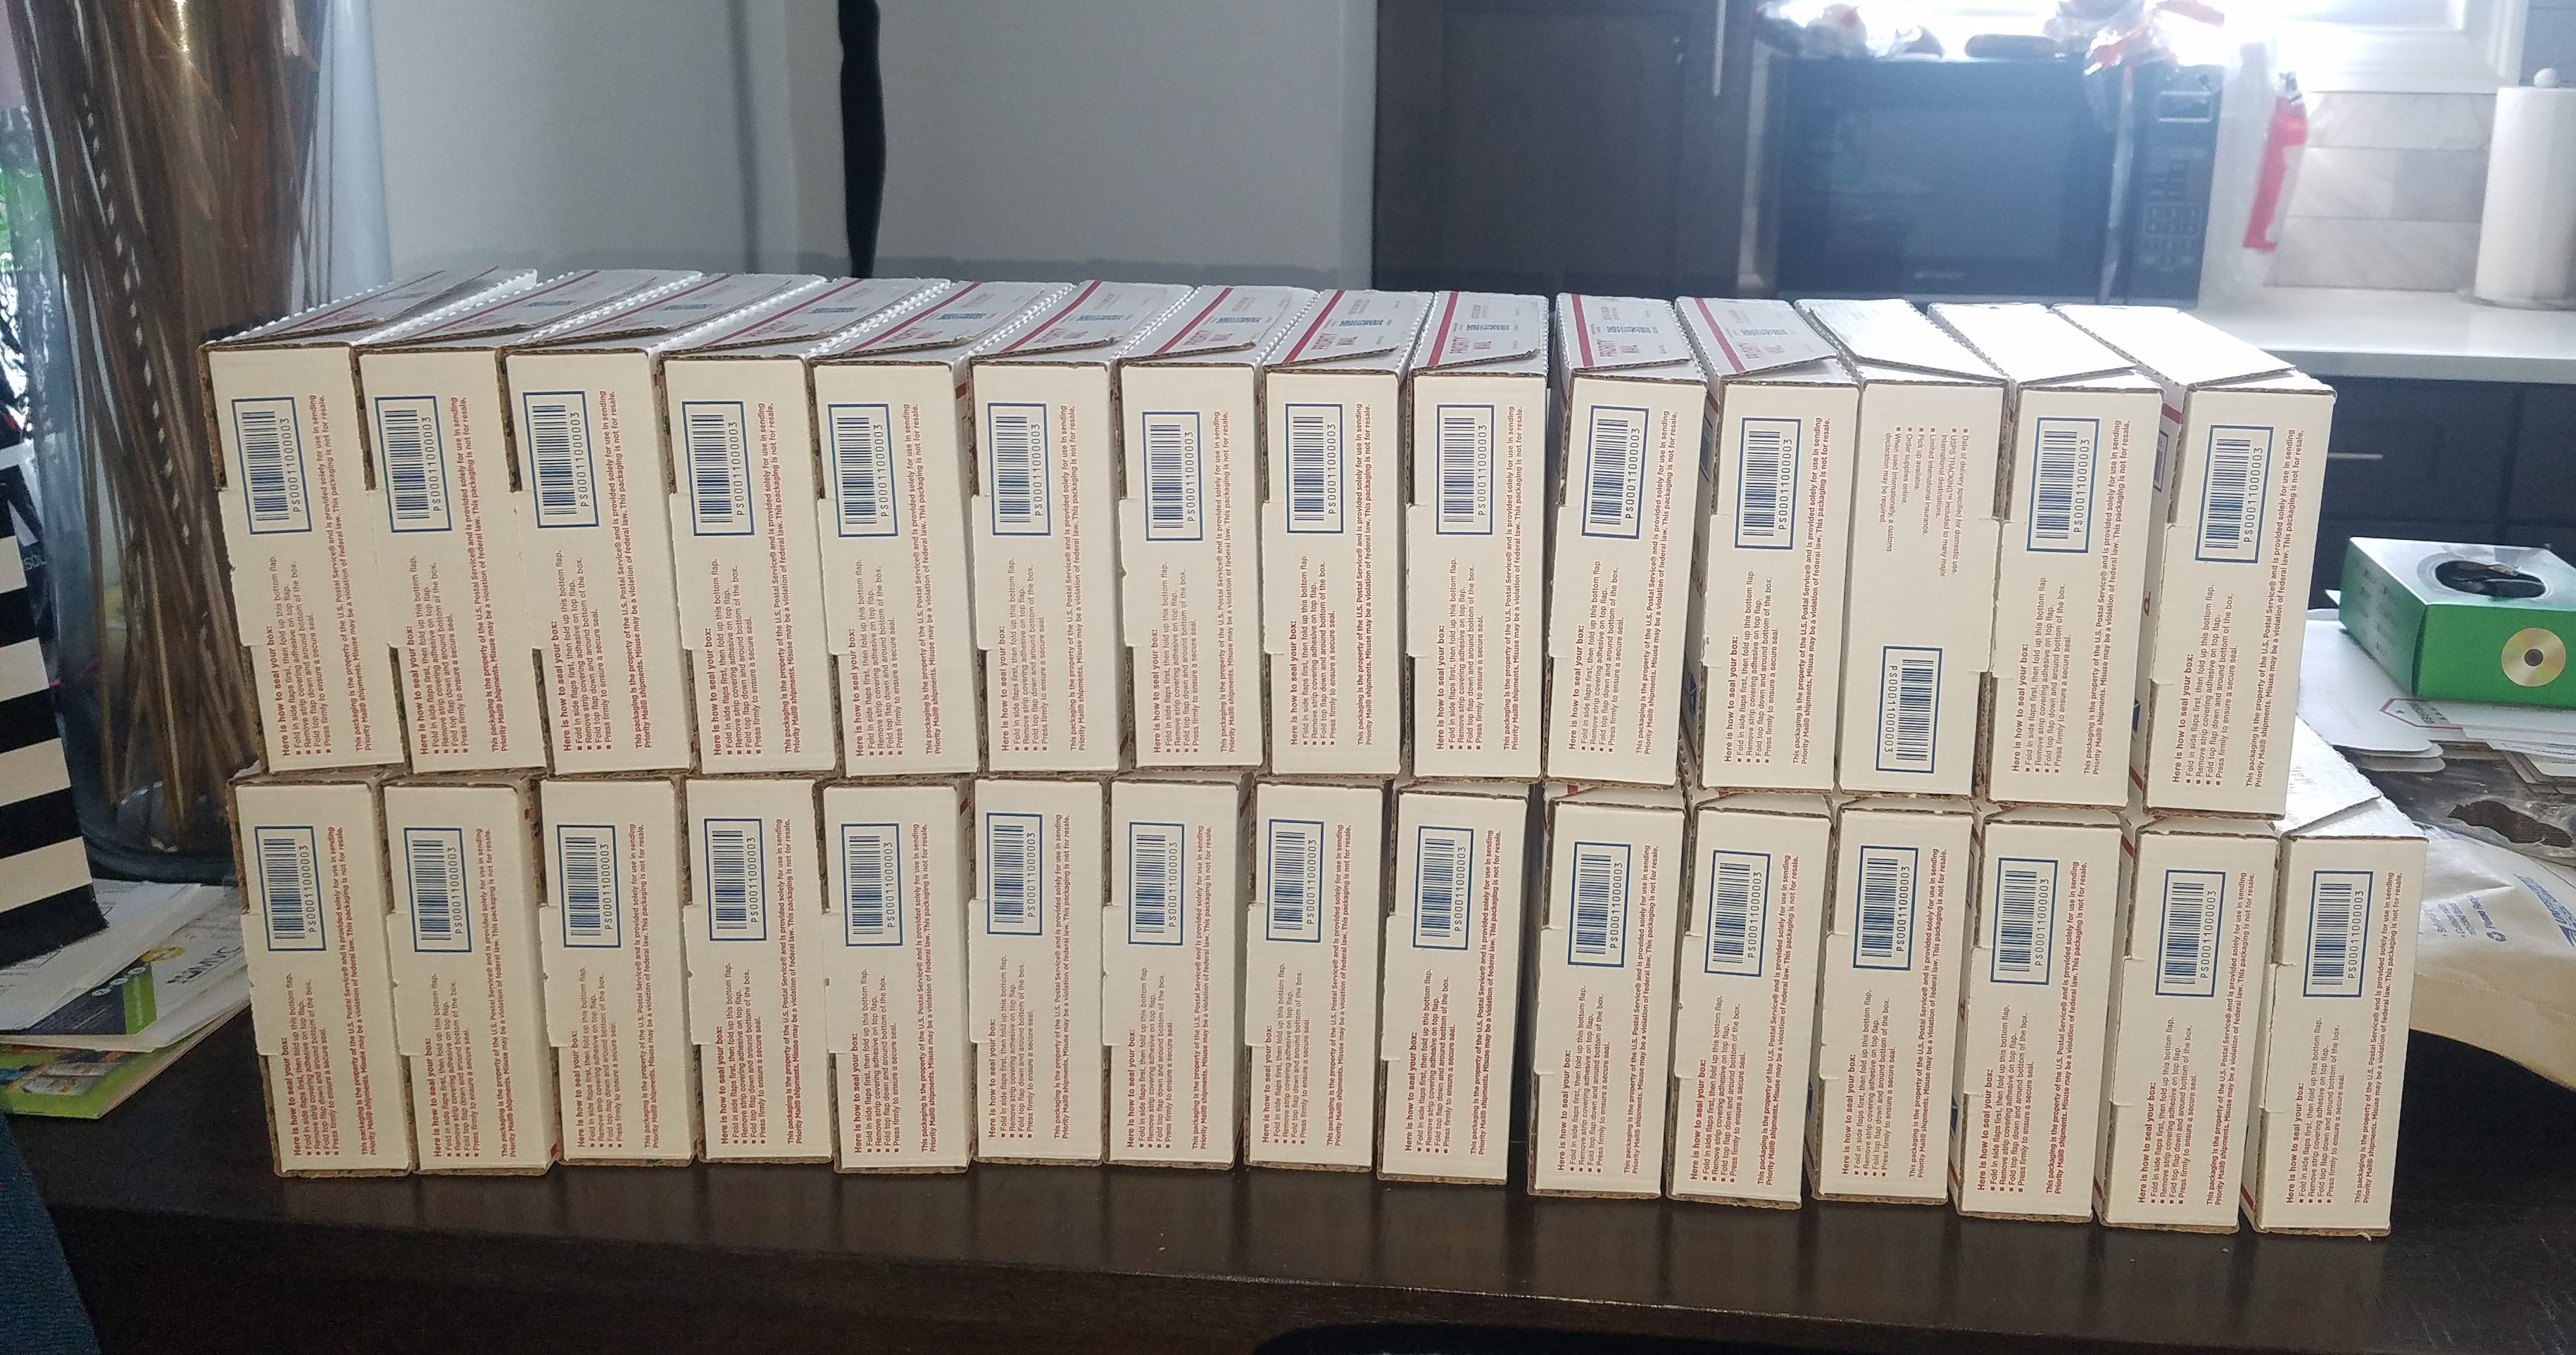 Approximately 30 boxes of individually packaged eyeglasses